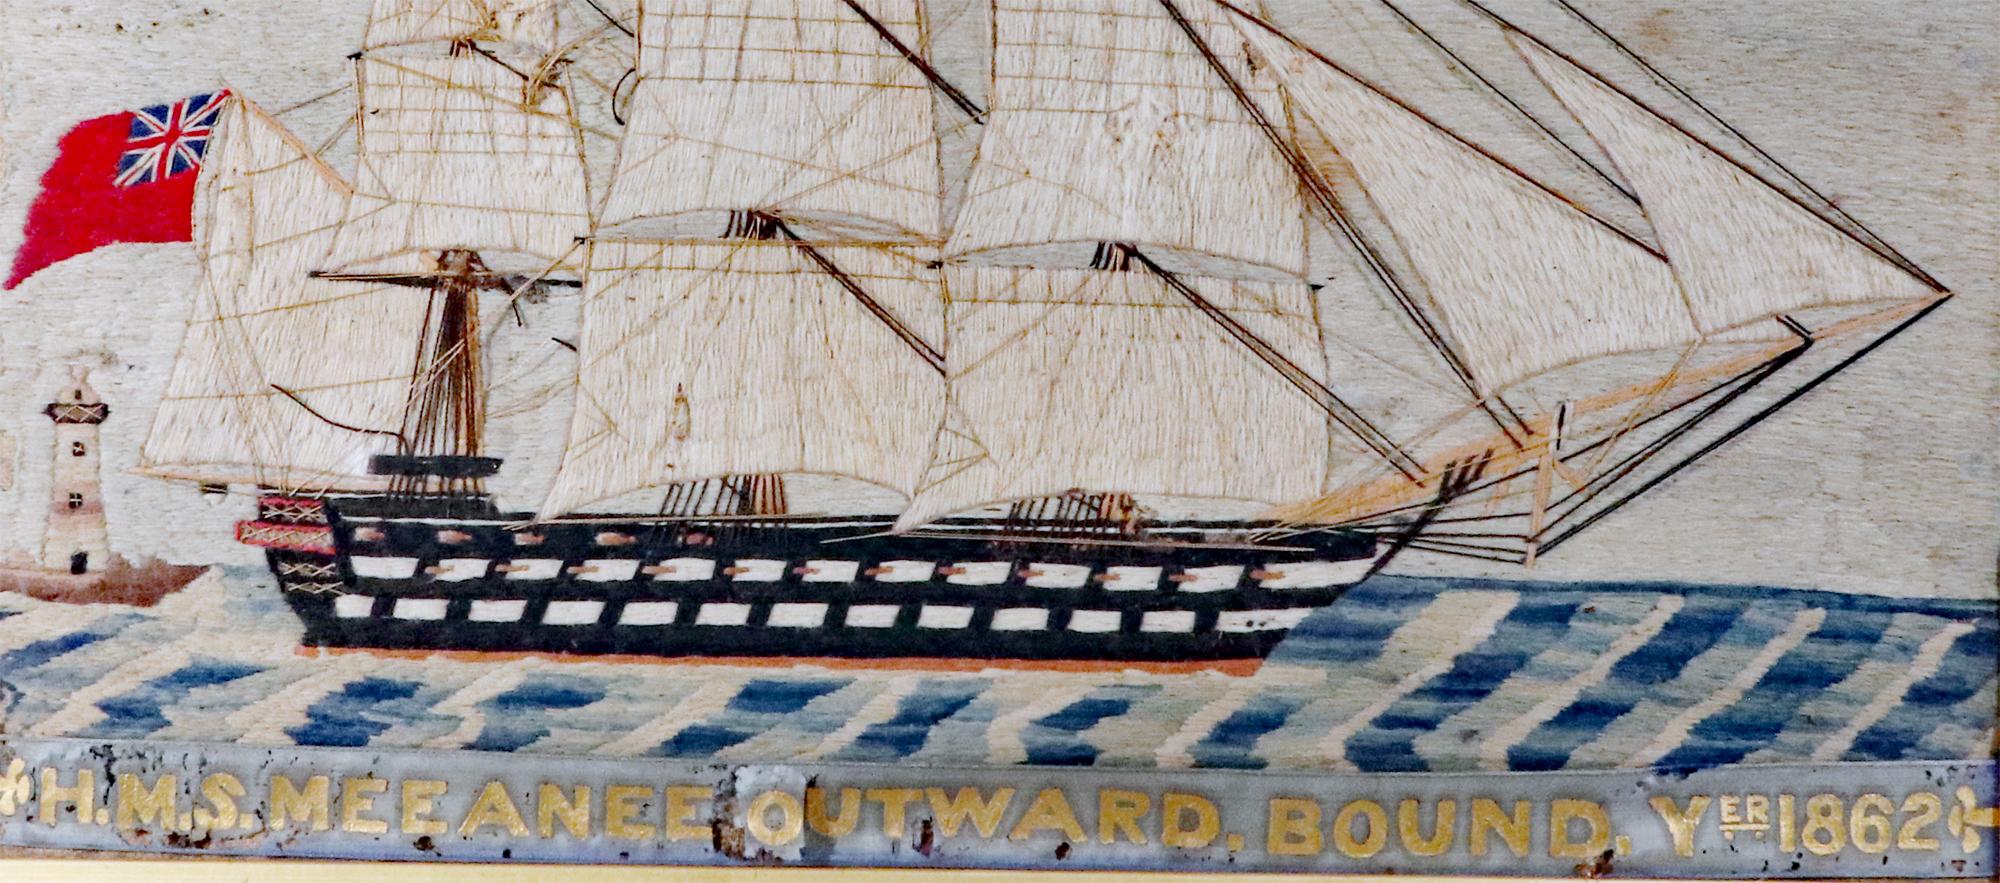 Sailor's Woolwork of H.M.S. Meeanee Outward Bound, Year 1862.

The British sailor's woolwork or woolie depicts a starboard view of the H.M.S. Meeanee outward bound passing a lighthouse as she sets out to sea leaving an unknown port on a wavy sea